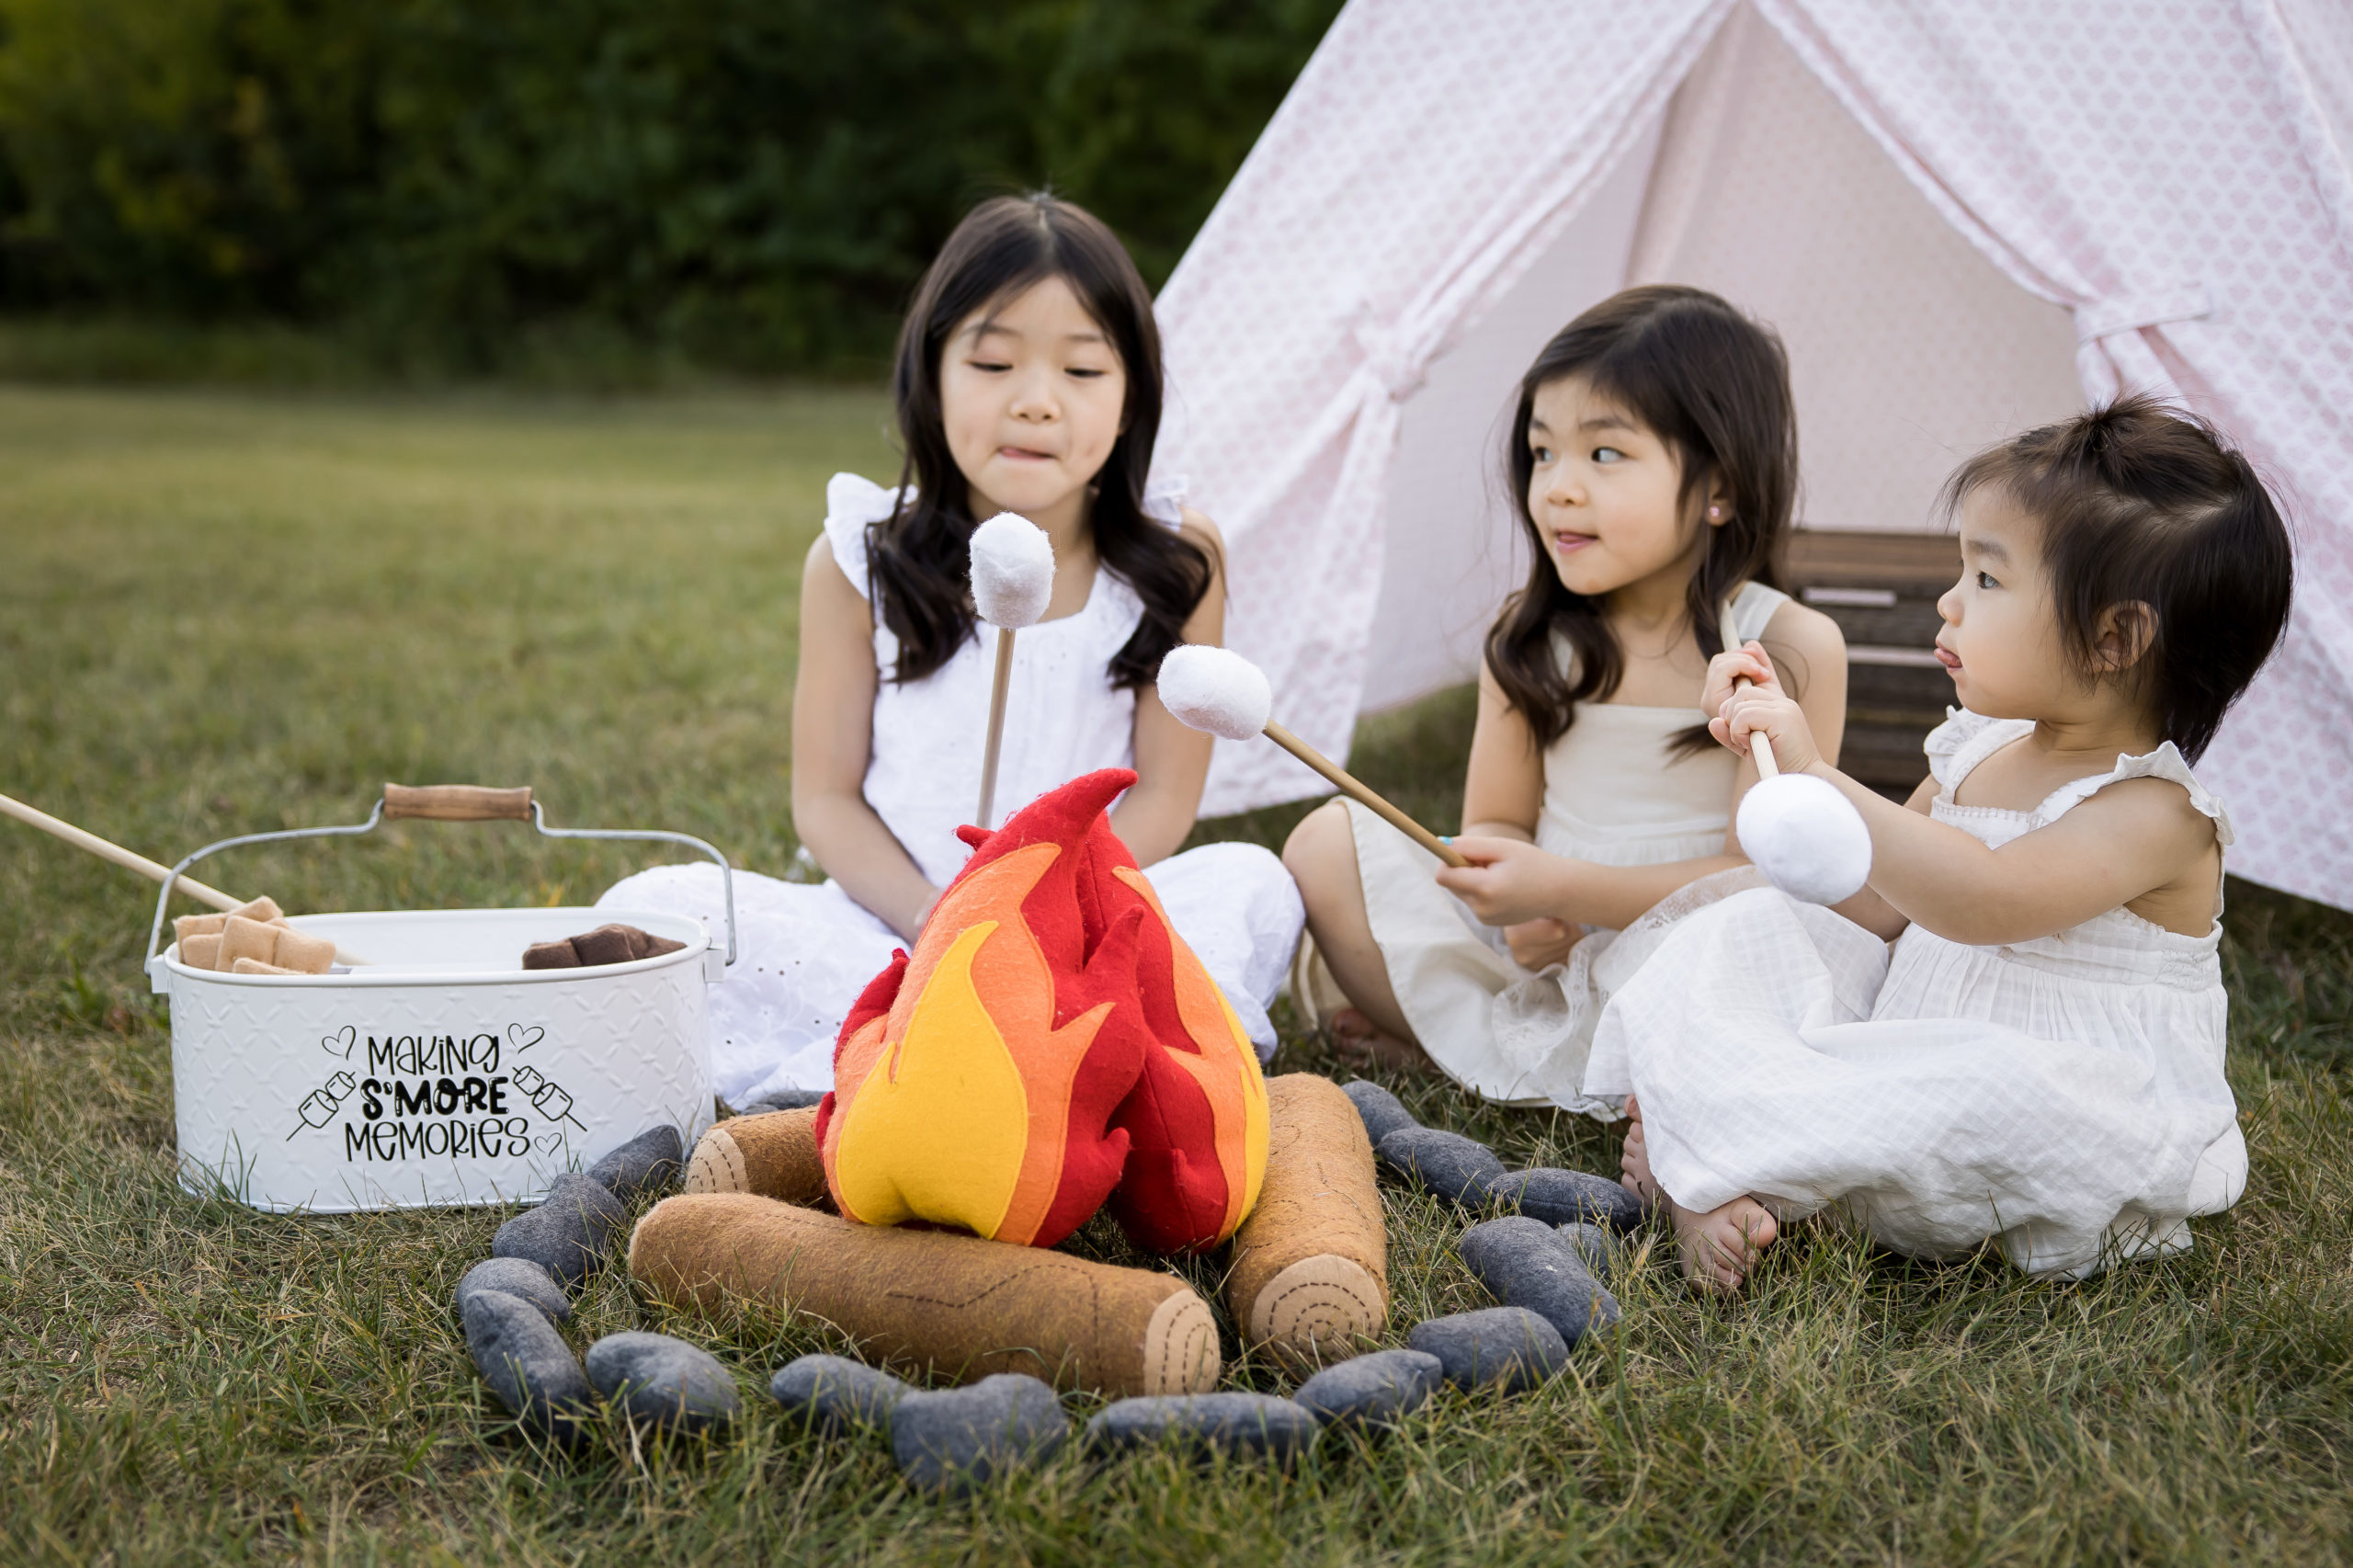 Edmonton outdoor family portraits with campfire props by Paper Bunny Studios